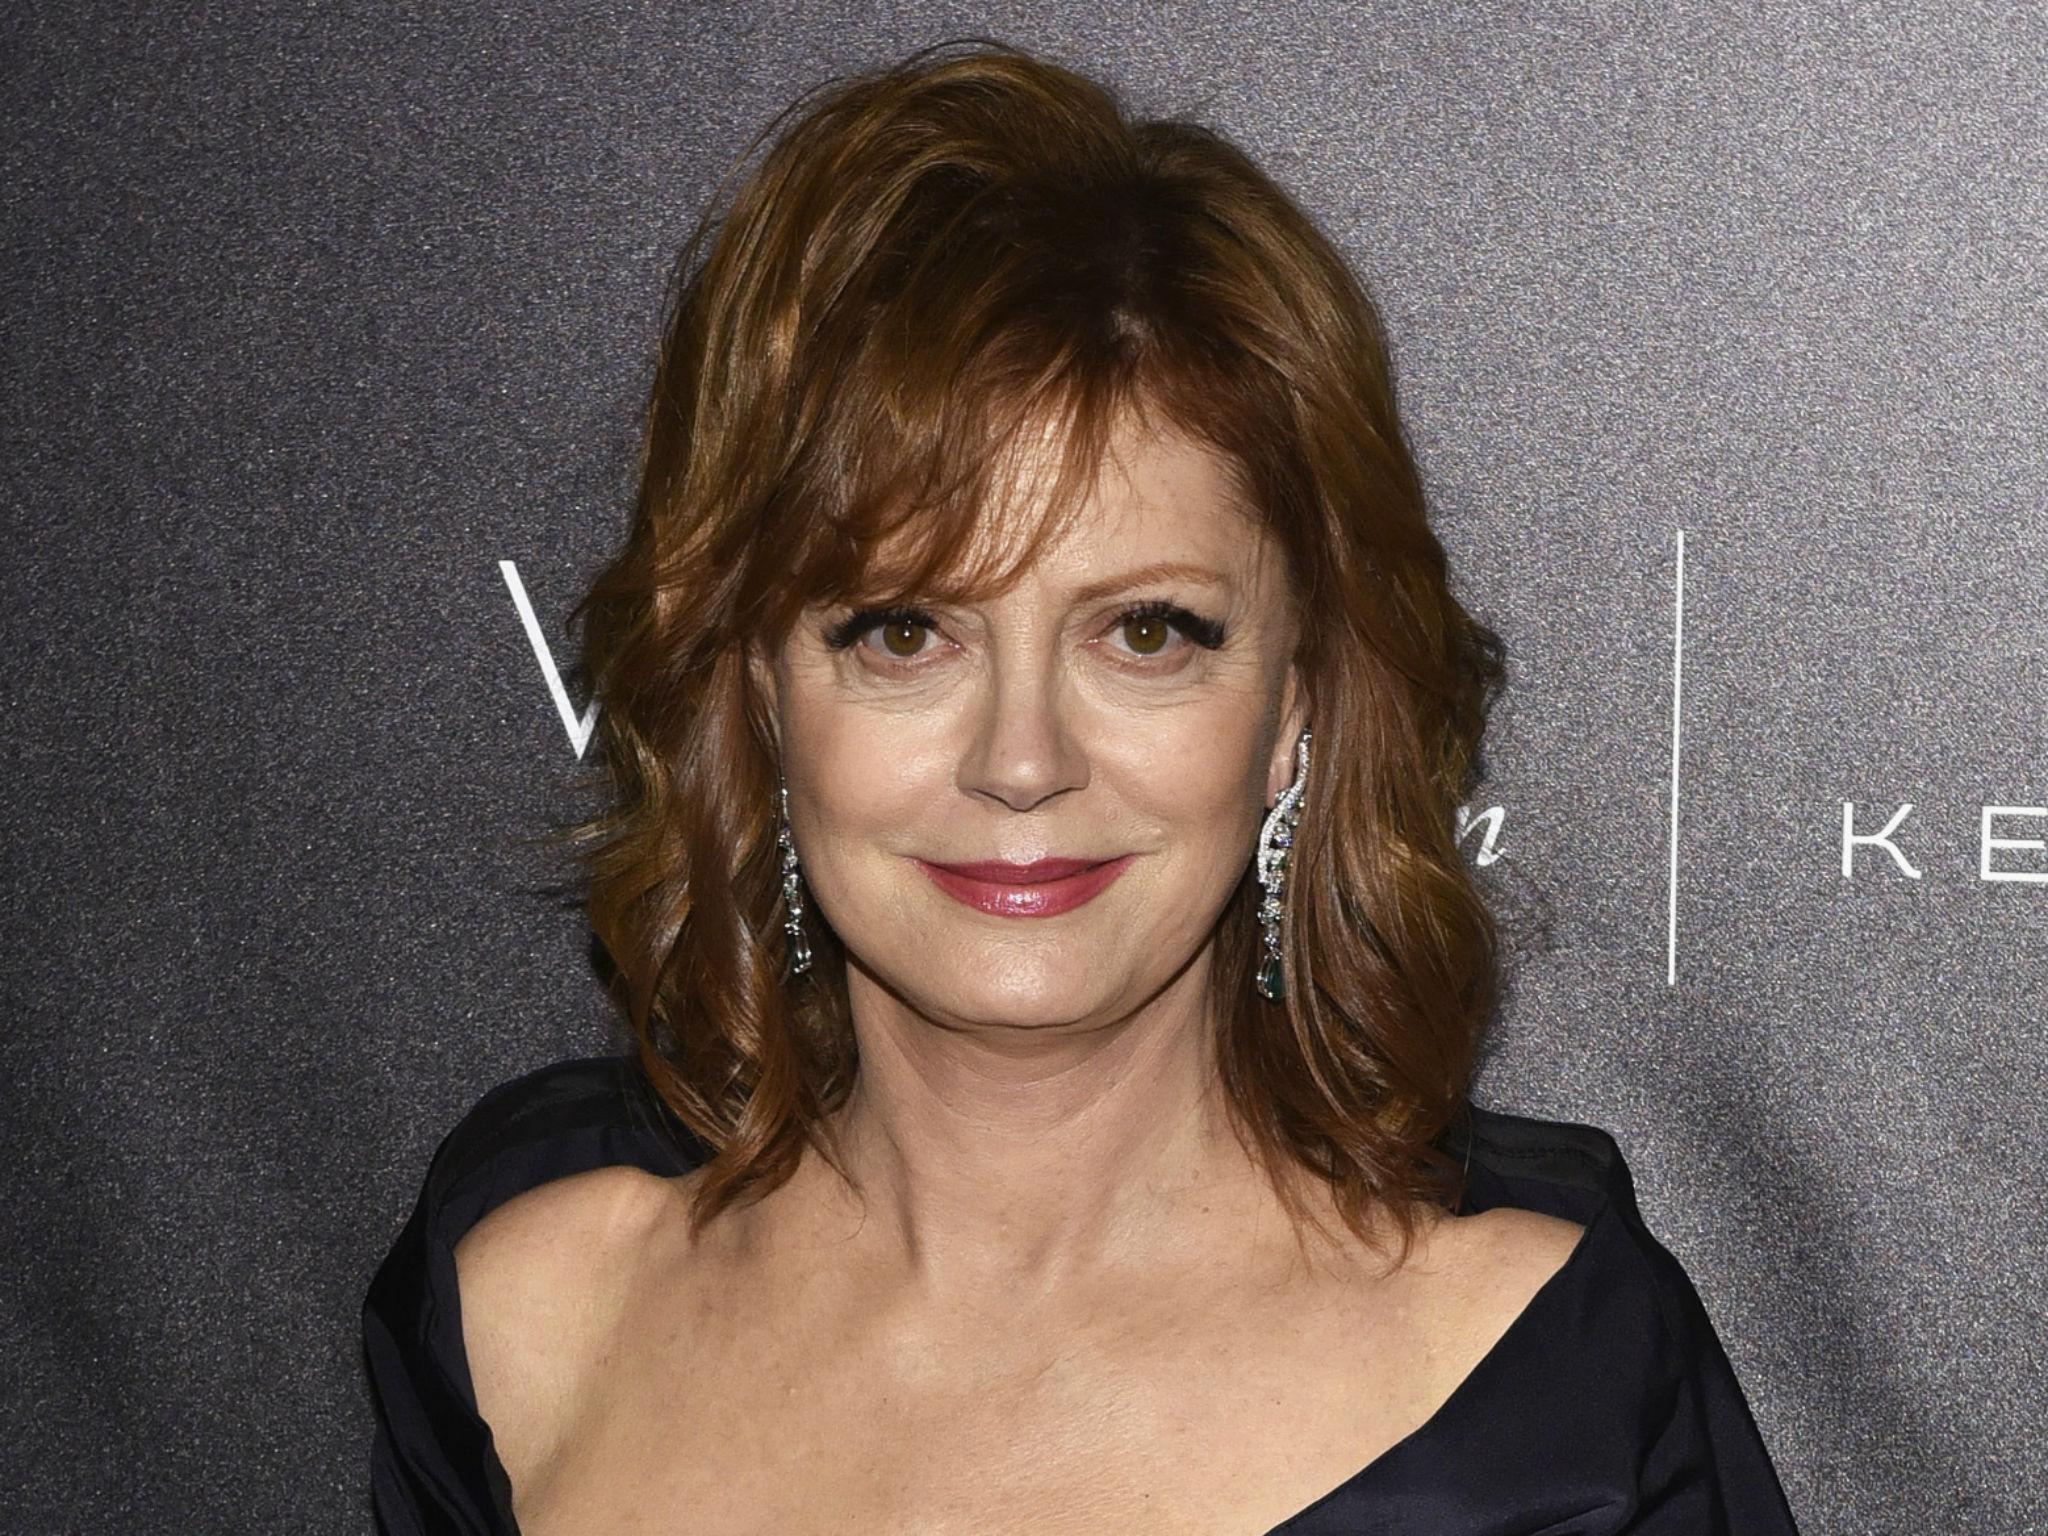 70 Year Old Woman Sex - Susan Sarandon says her sexuality is 'up for grabs' for people of any  gender | The Independent | The Independent